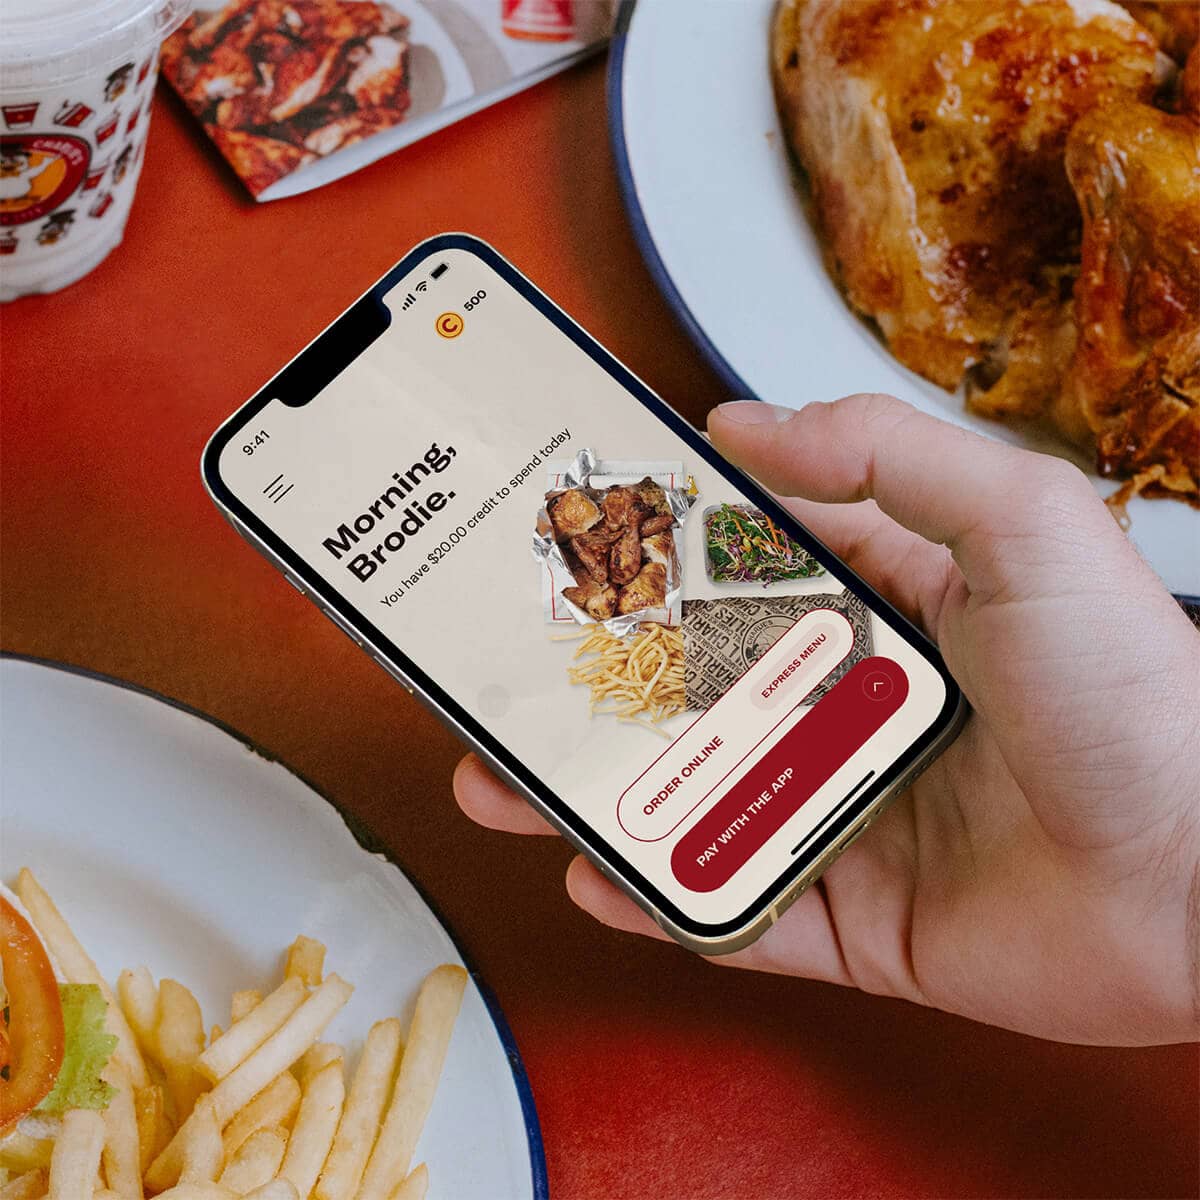 “Our new ordering & loyalty app wouldn't be possible without Bite”